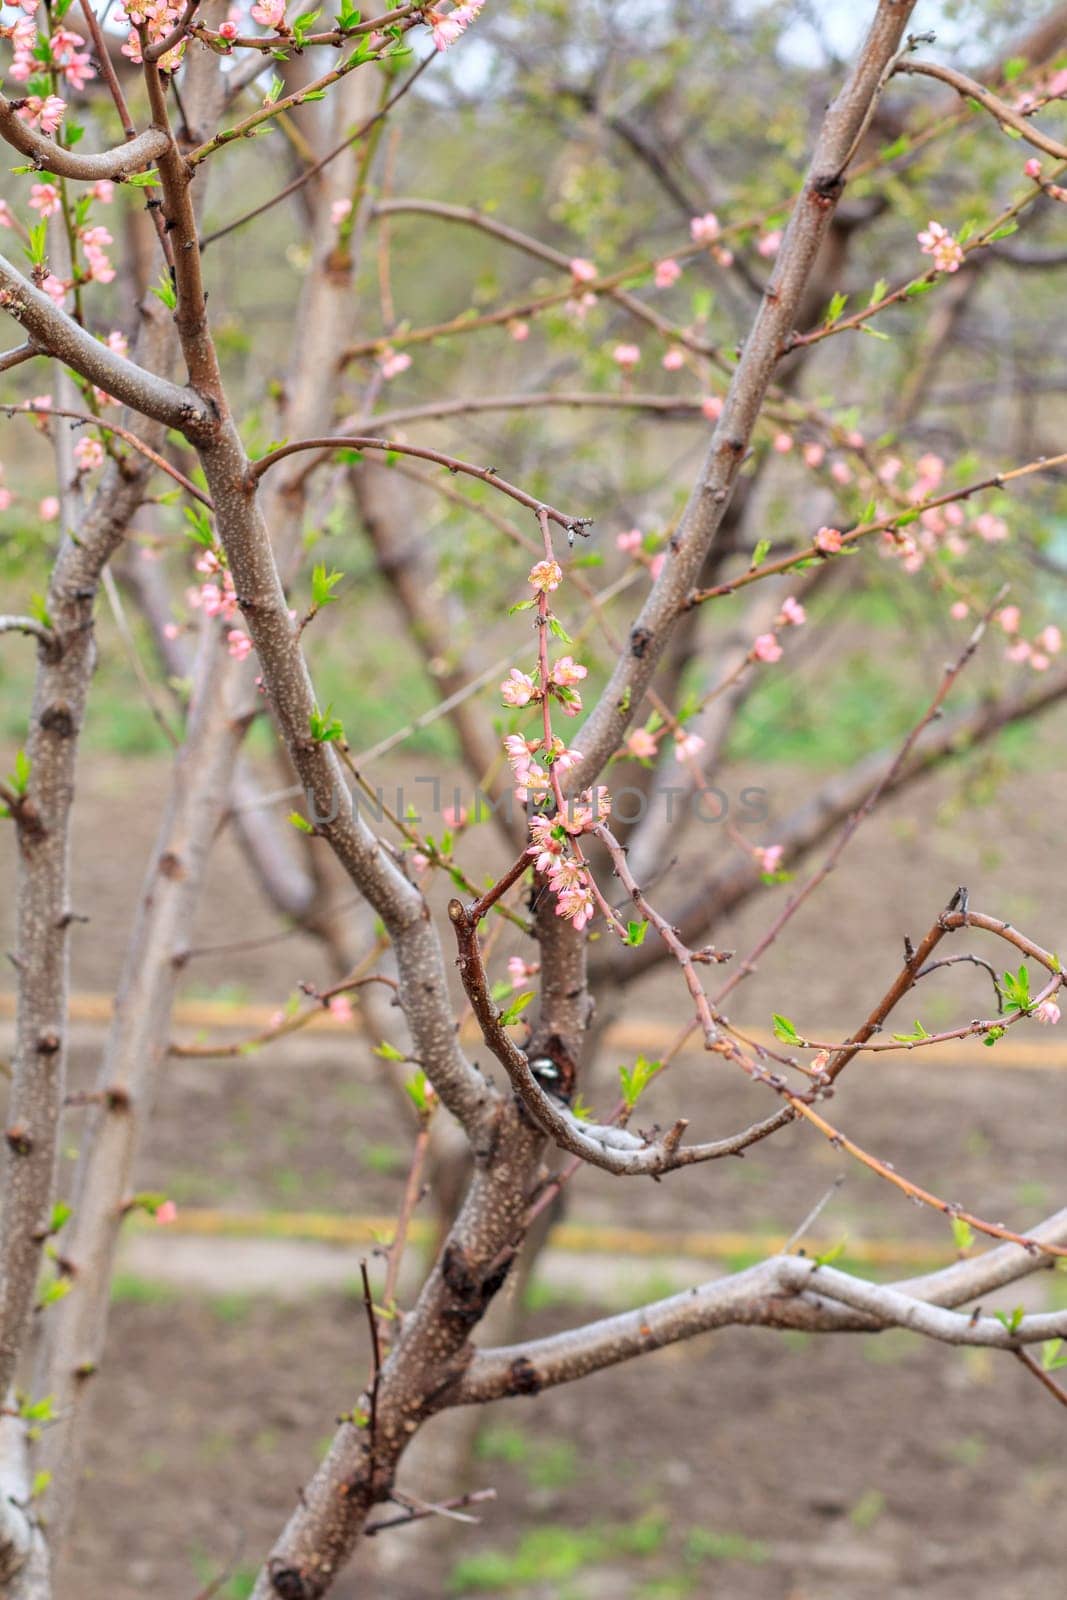 Branches of peach tree in the period of spring flowering in blurred background. Shallow depth of field. Selective focus on flowers.